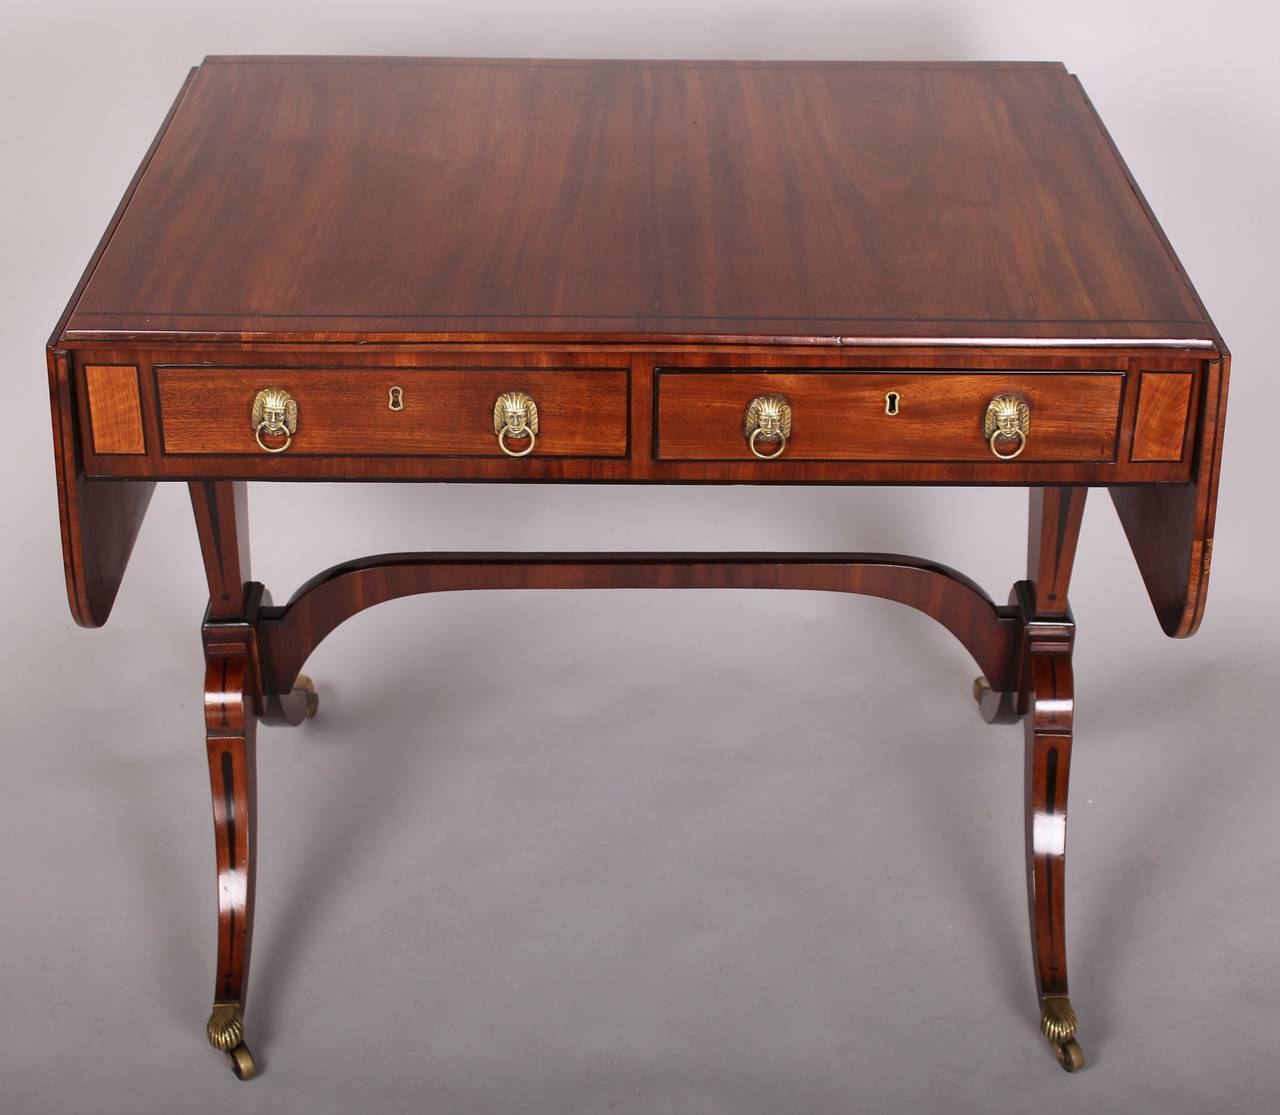 Regency period mahogany sofa-table inlaid with ebony bandings and decorative motifs; the frieze fitted on each side with one real and one dummy drawer with original brass sphinx's head ring-handles, on an elegant base with tapered end-supports, an